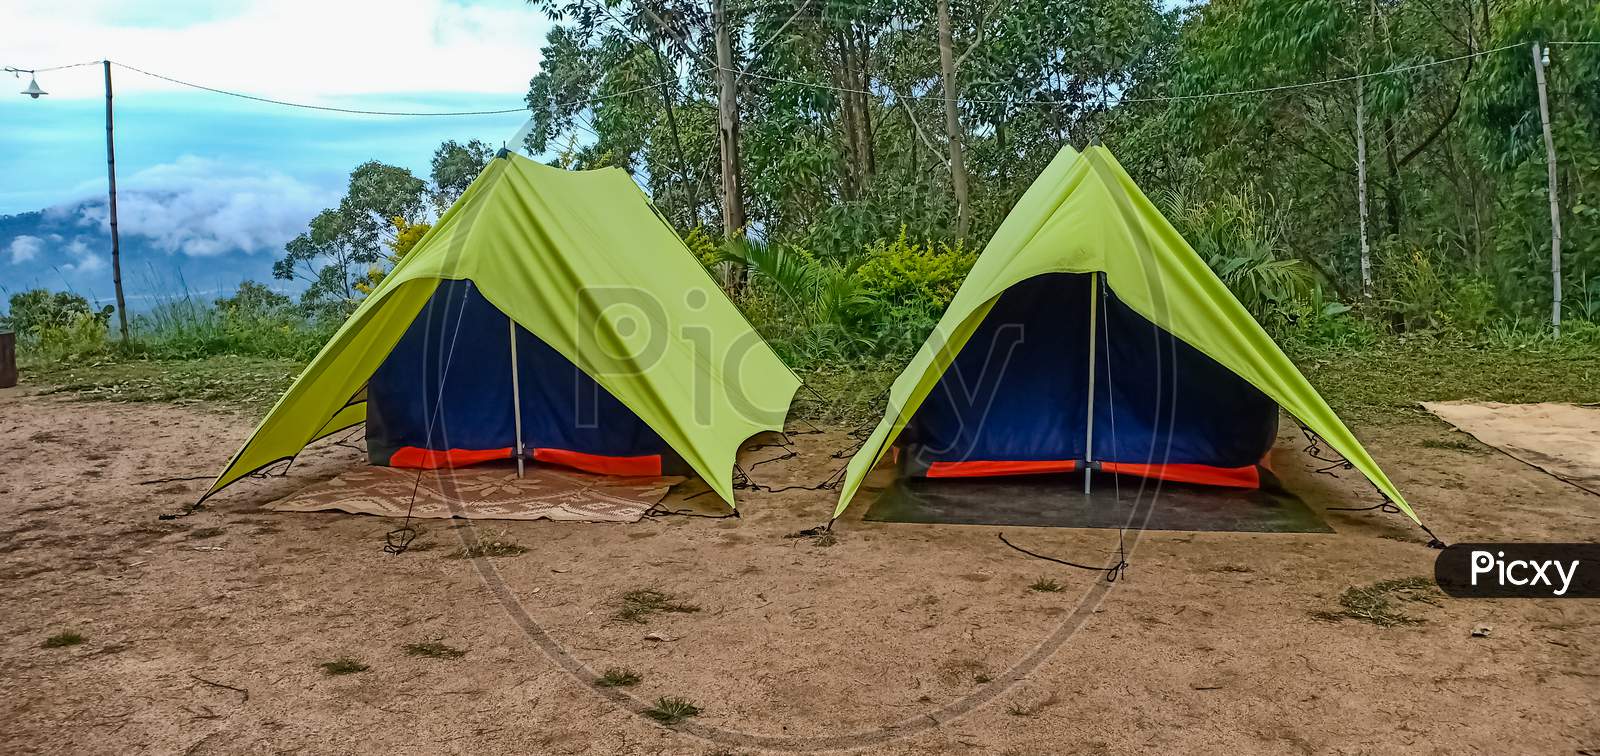 Triangle Tent Camping Near Mountain Forest. Camping Tent In The Top Of Mountain In The Morning Background Forest